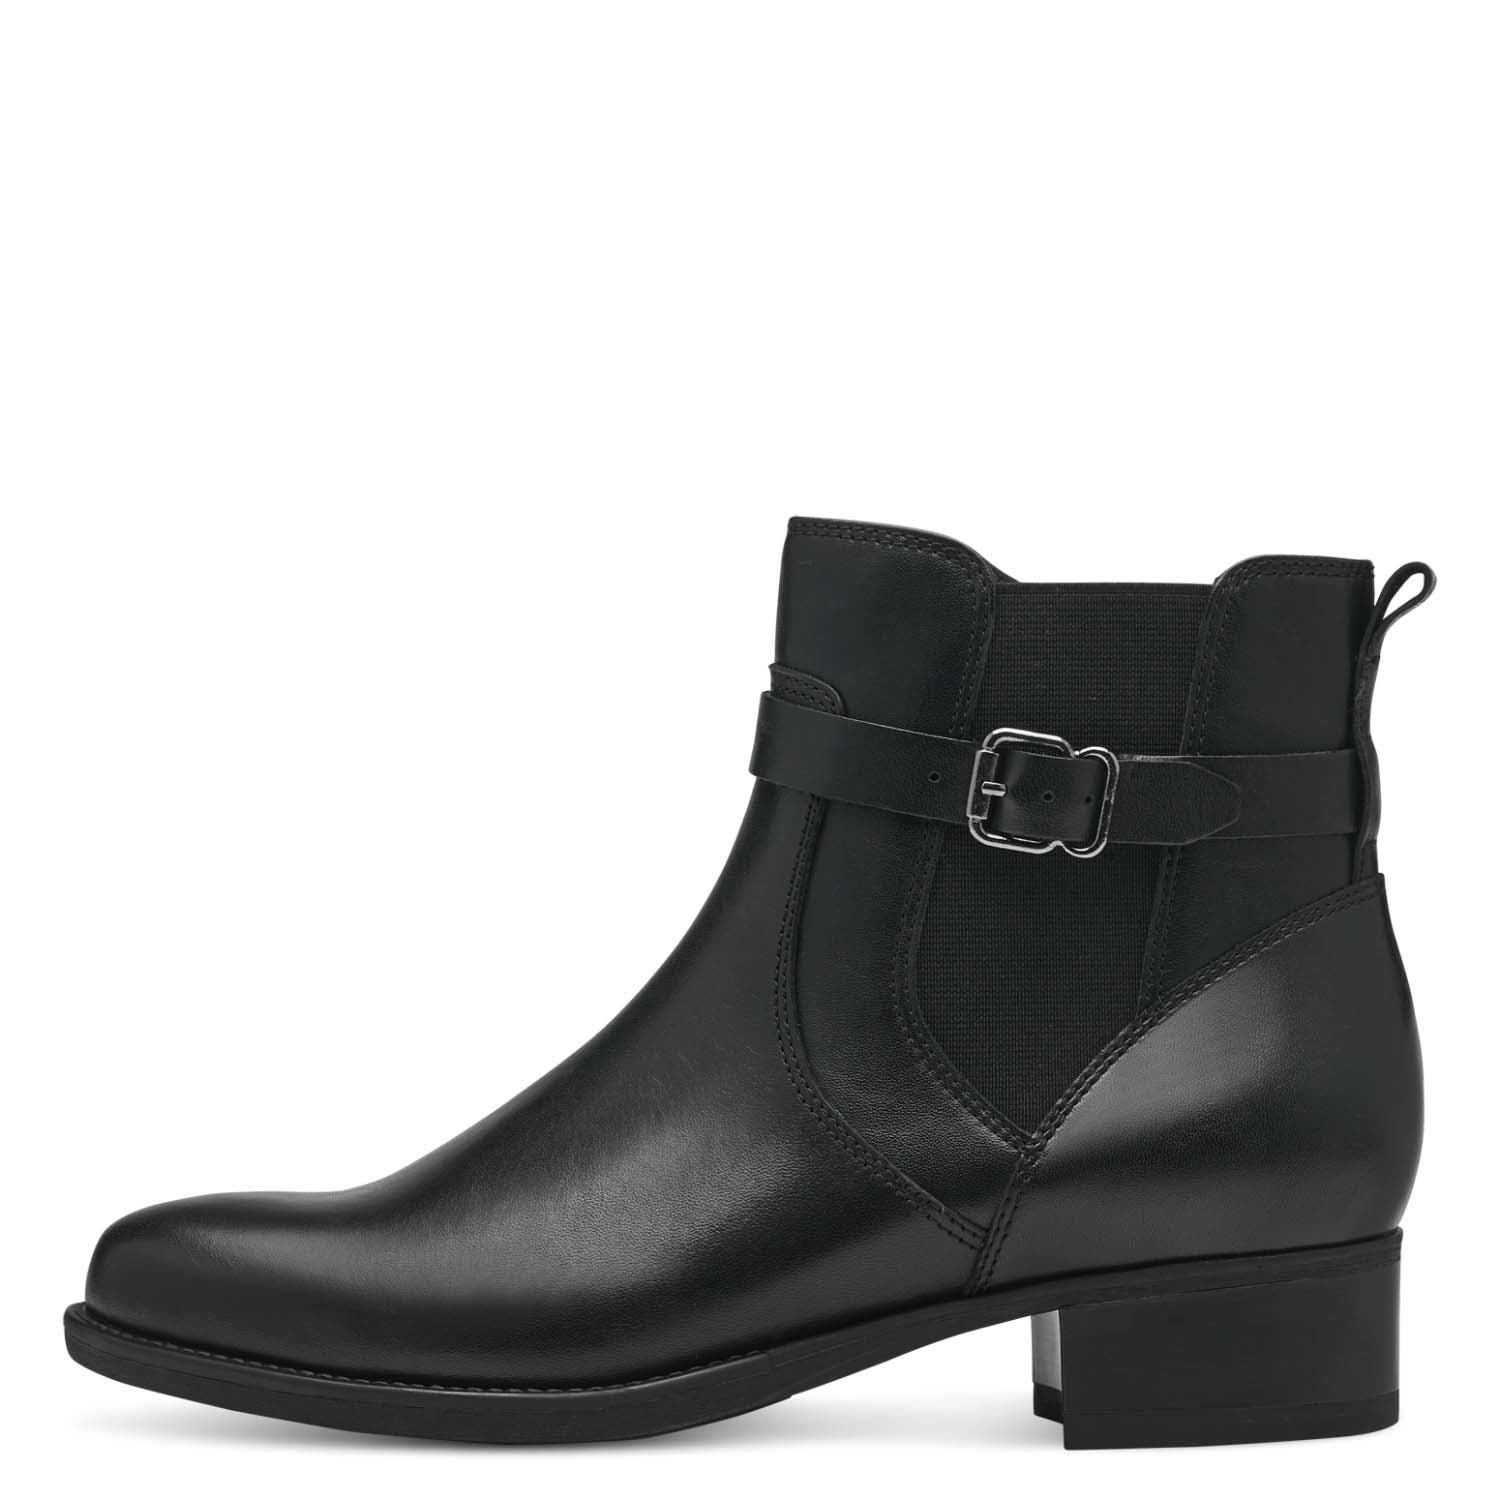 Front view of the Tamaris Black Leather Ankle Boot showcasing its elegant design and wrap-around strap.